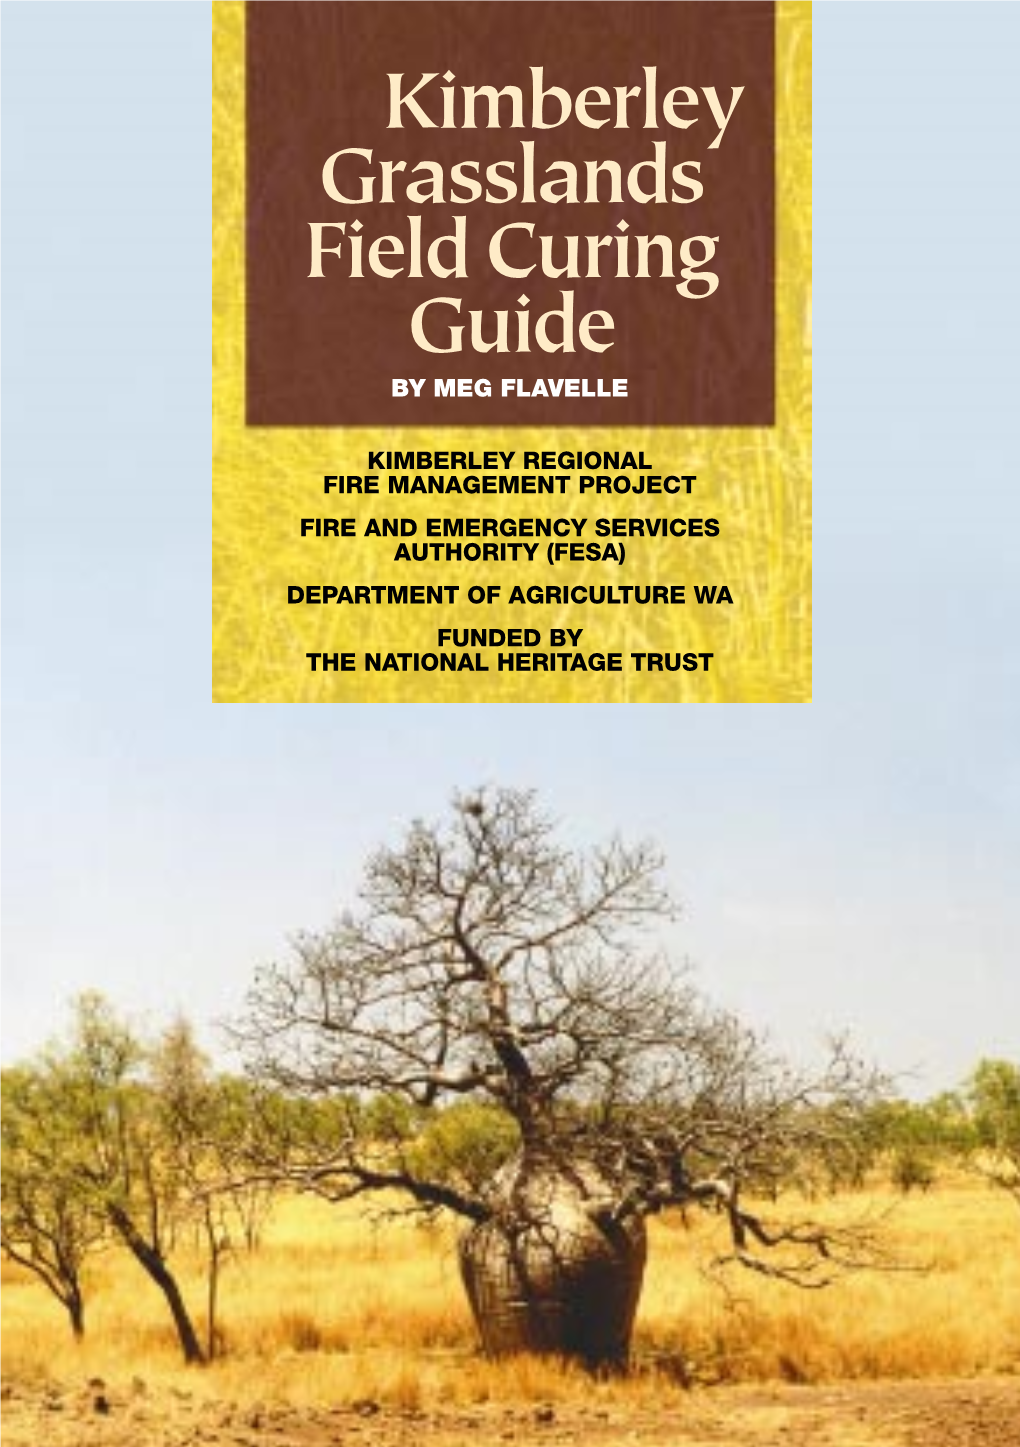 Kimberley Grasslands Field Curing Guide by MEG FLAVELLE